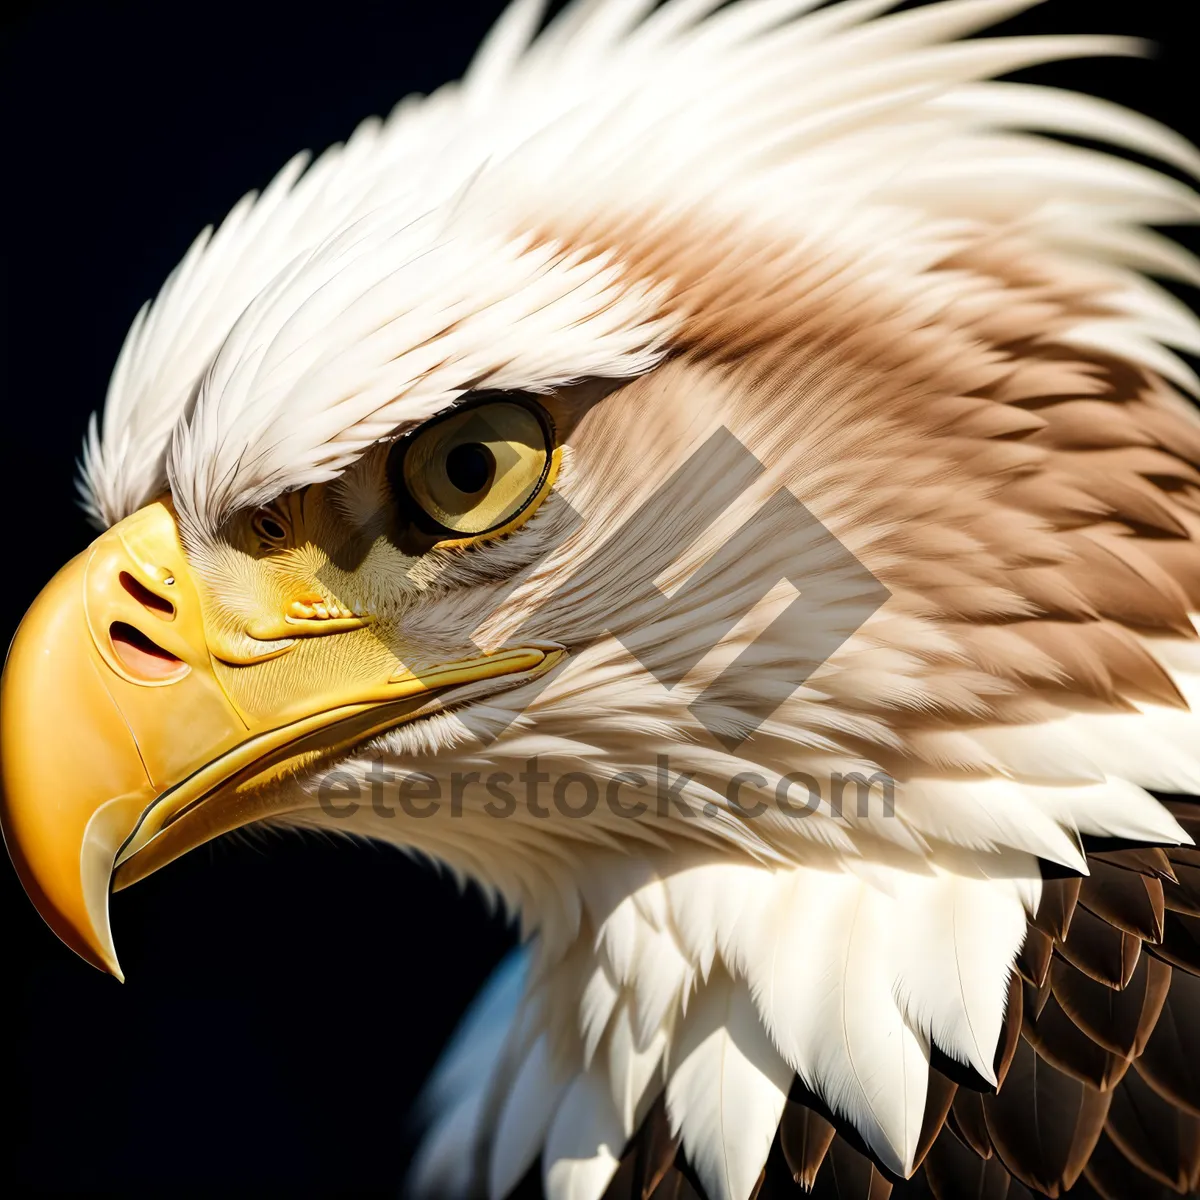 Picture of Bald Eagle Close-Up: Majestic Predator with Yellow Beak